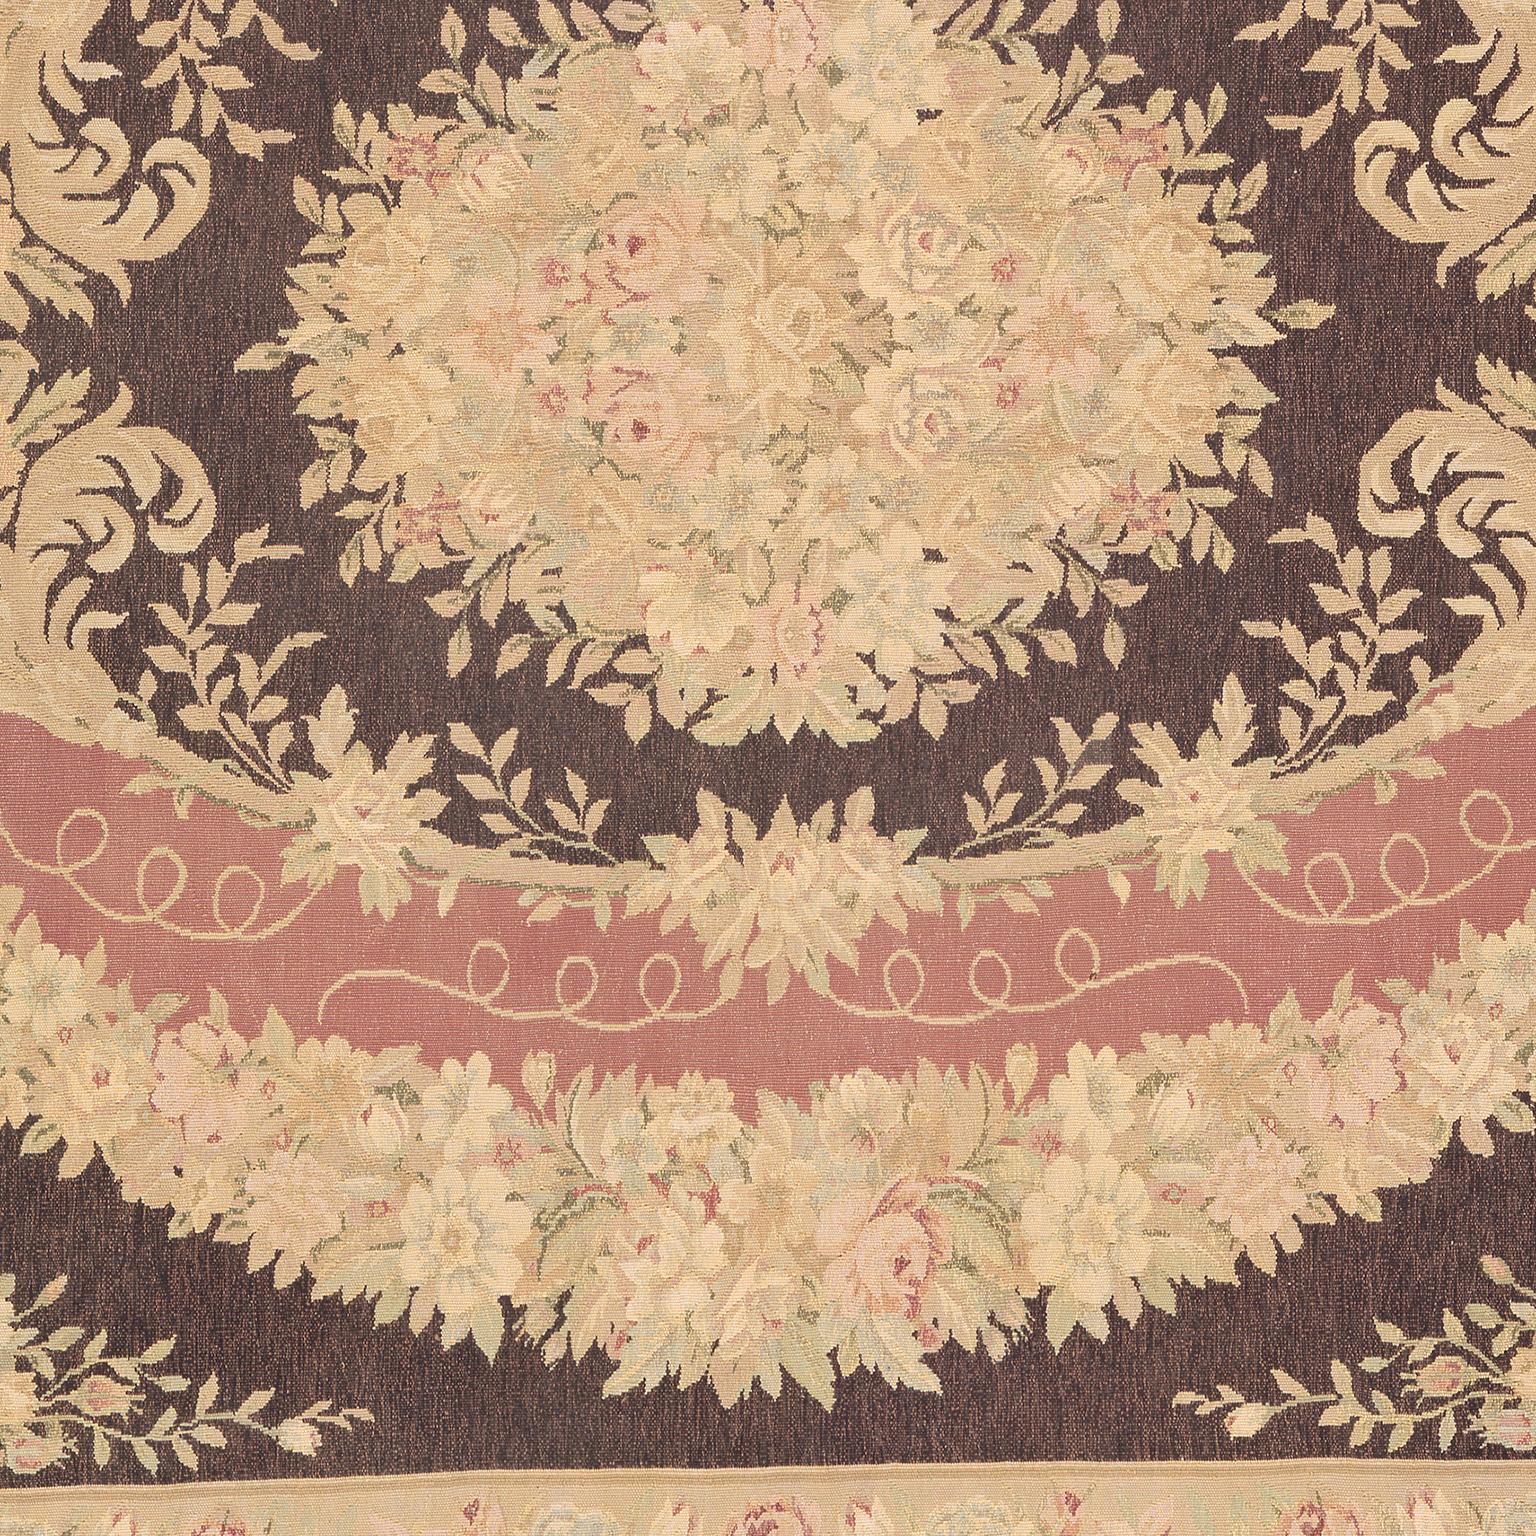 20th Century French Aubusson Carpet, 1920 For Sale